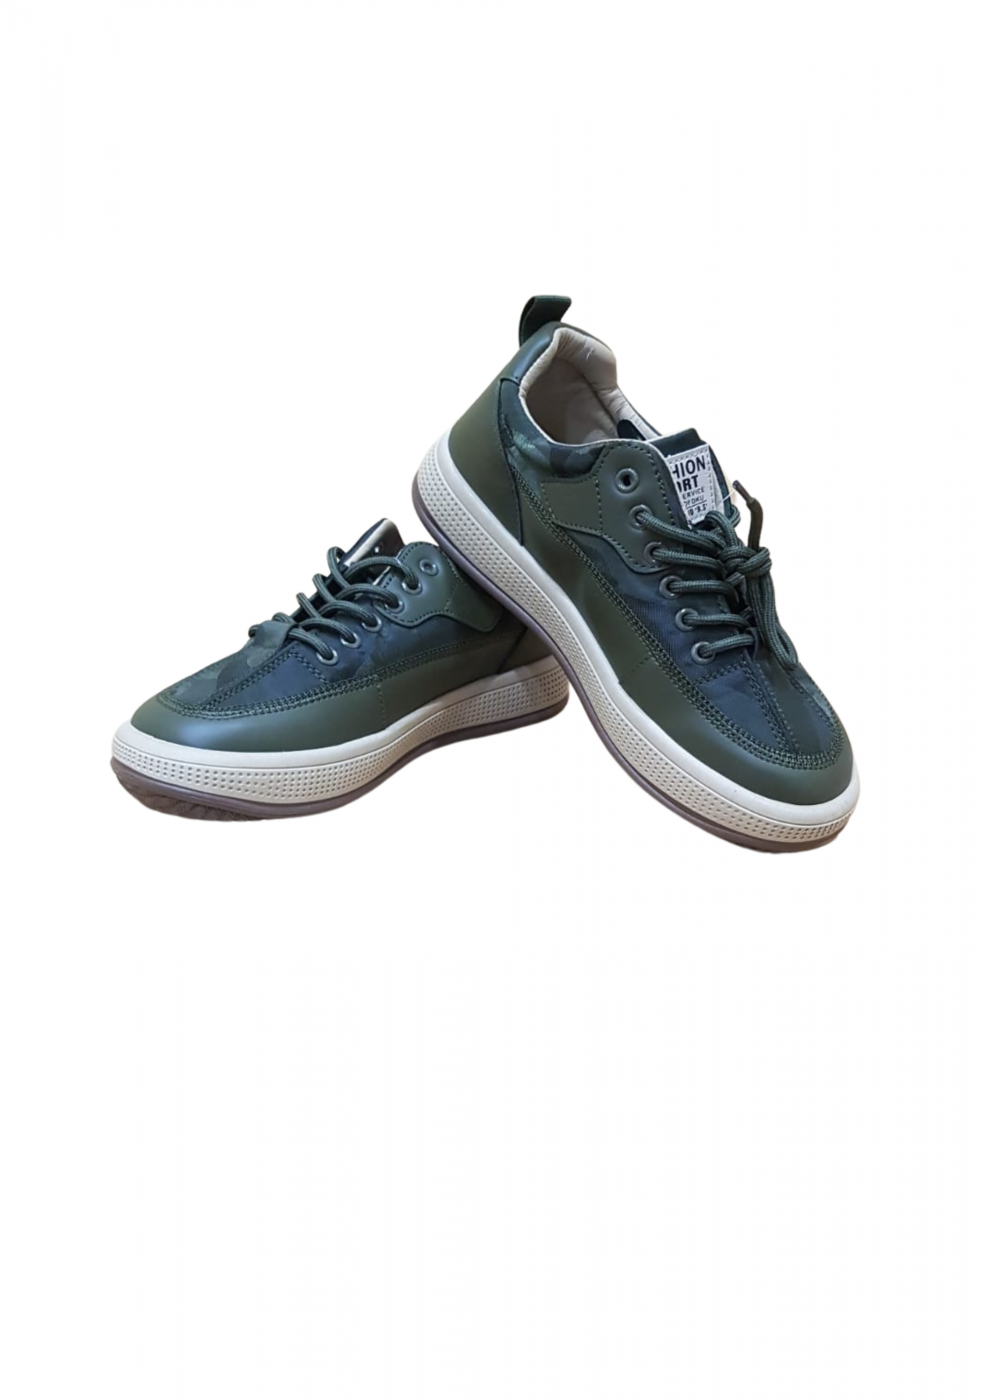 Green Stylish Sneakers For Men